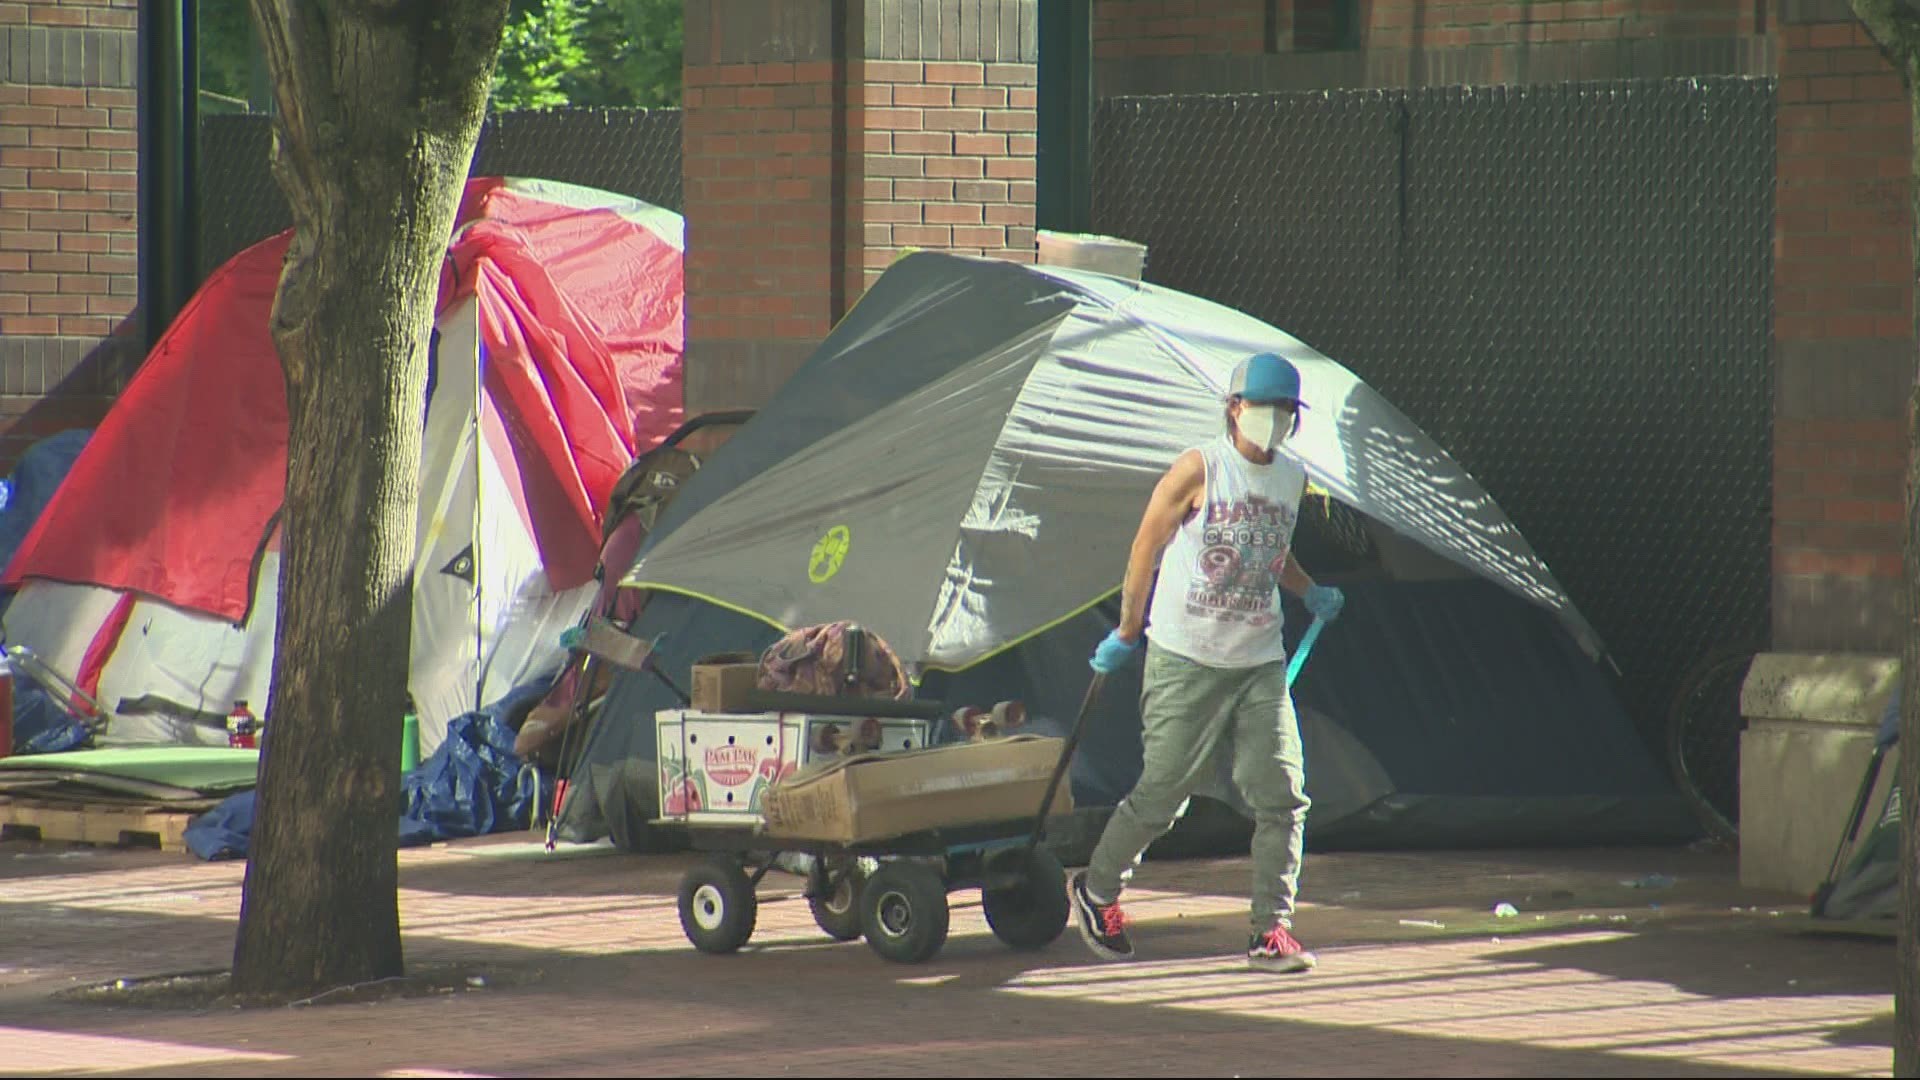 For Portland's homeless, the record heat could be deadly. Local agencies are scrambling to spread the word and get people inside. Maggie Vespa reports.